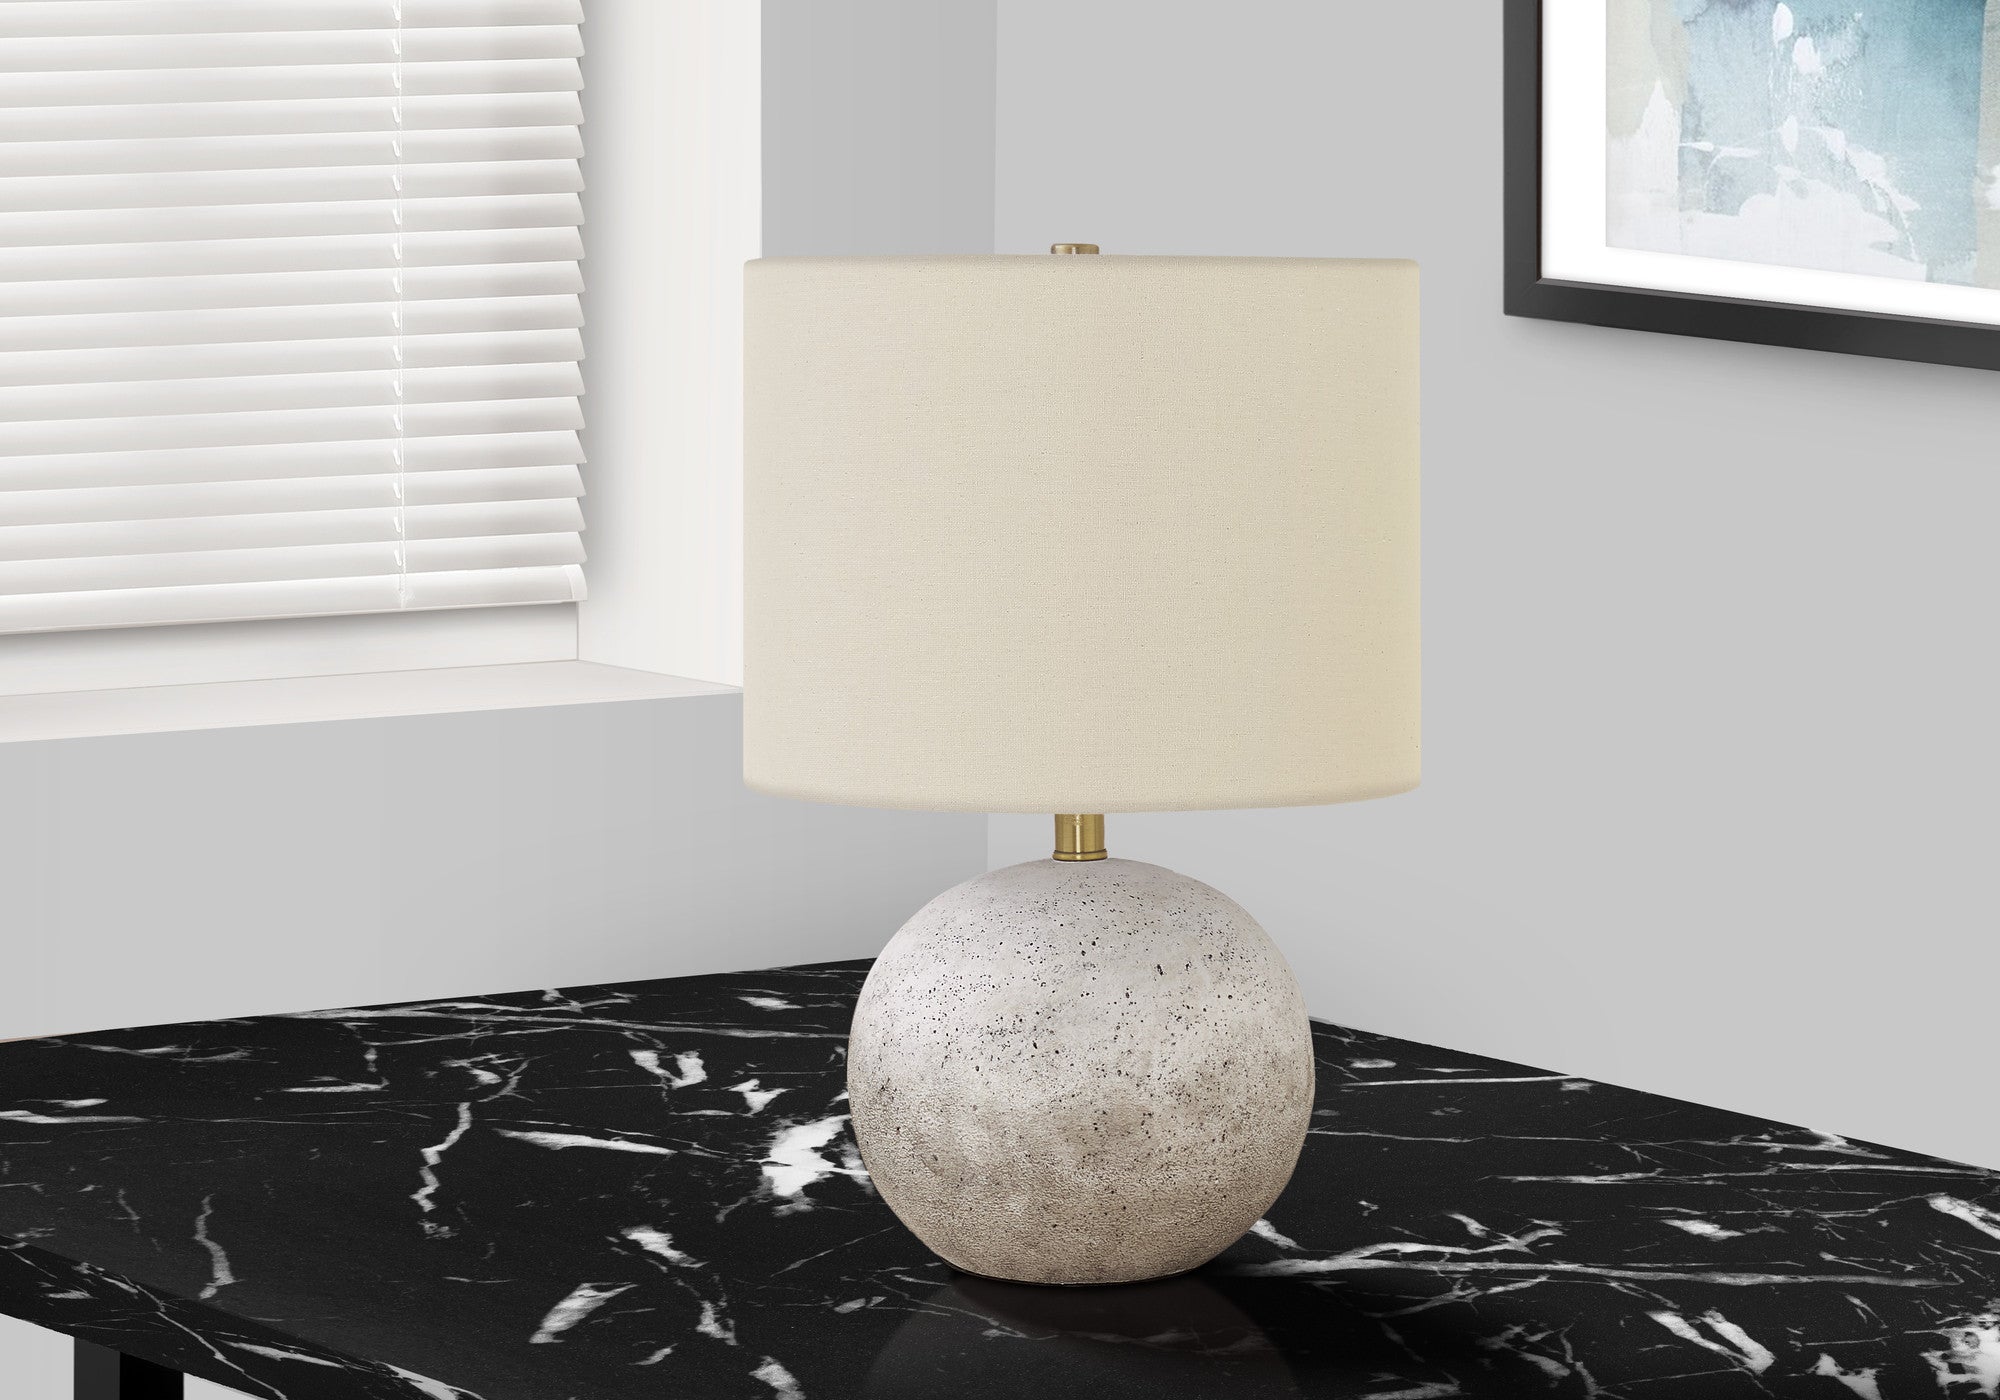 20" Gray Concrete Round Table Lamp With Ivory Drum Shade